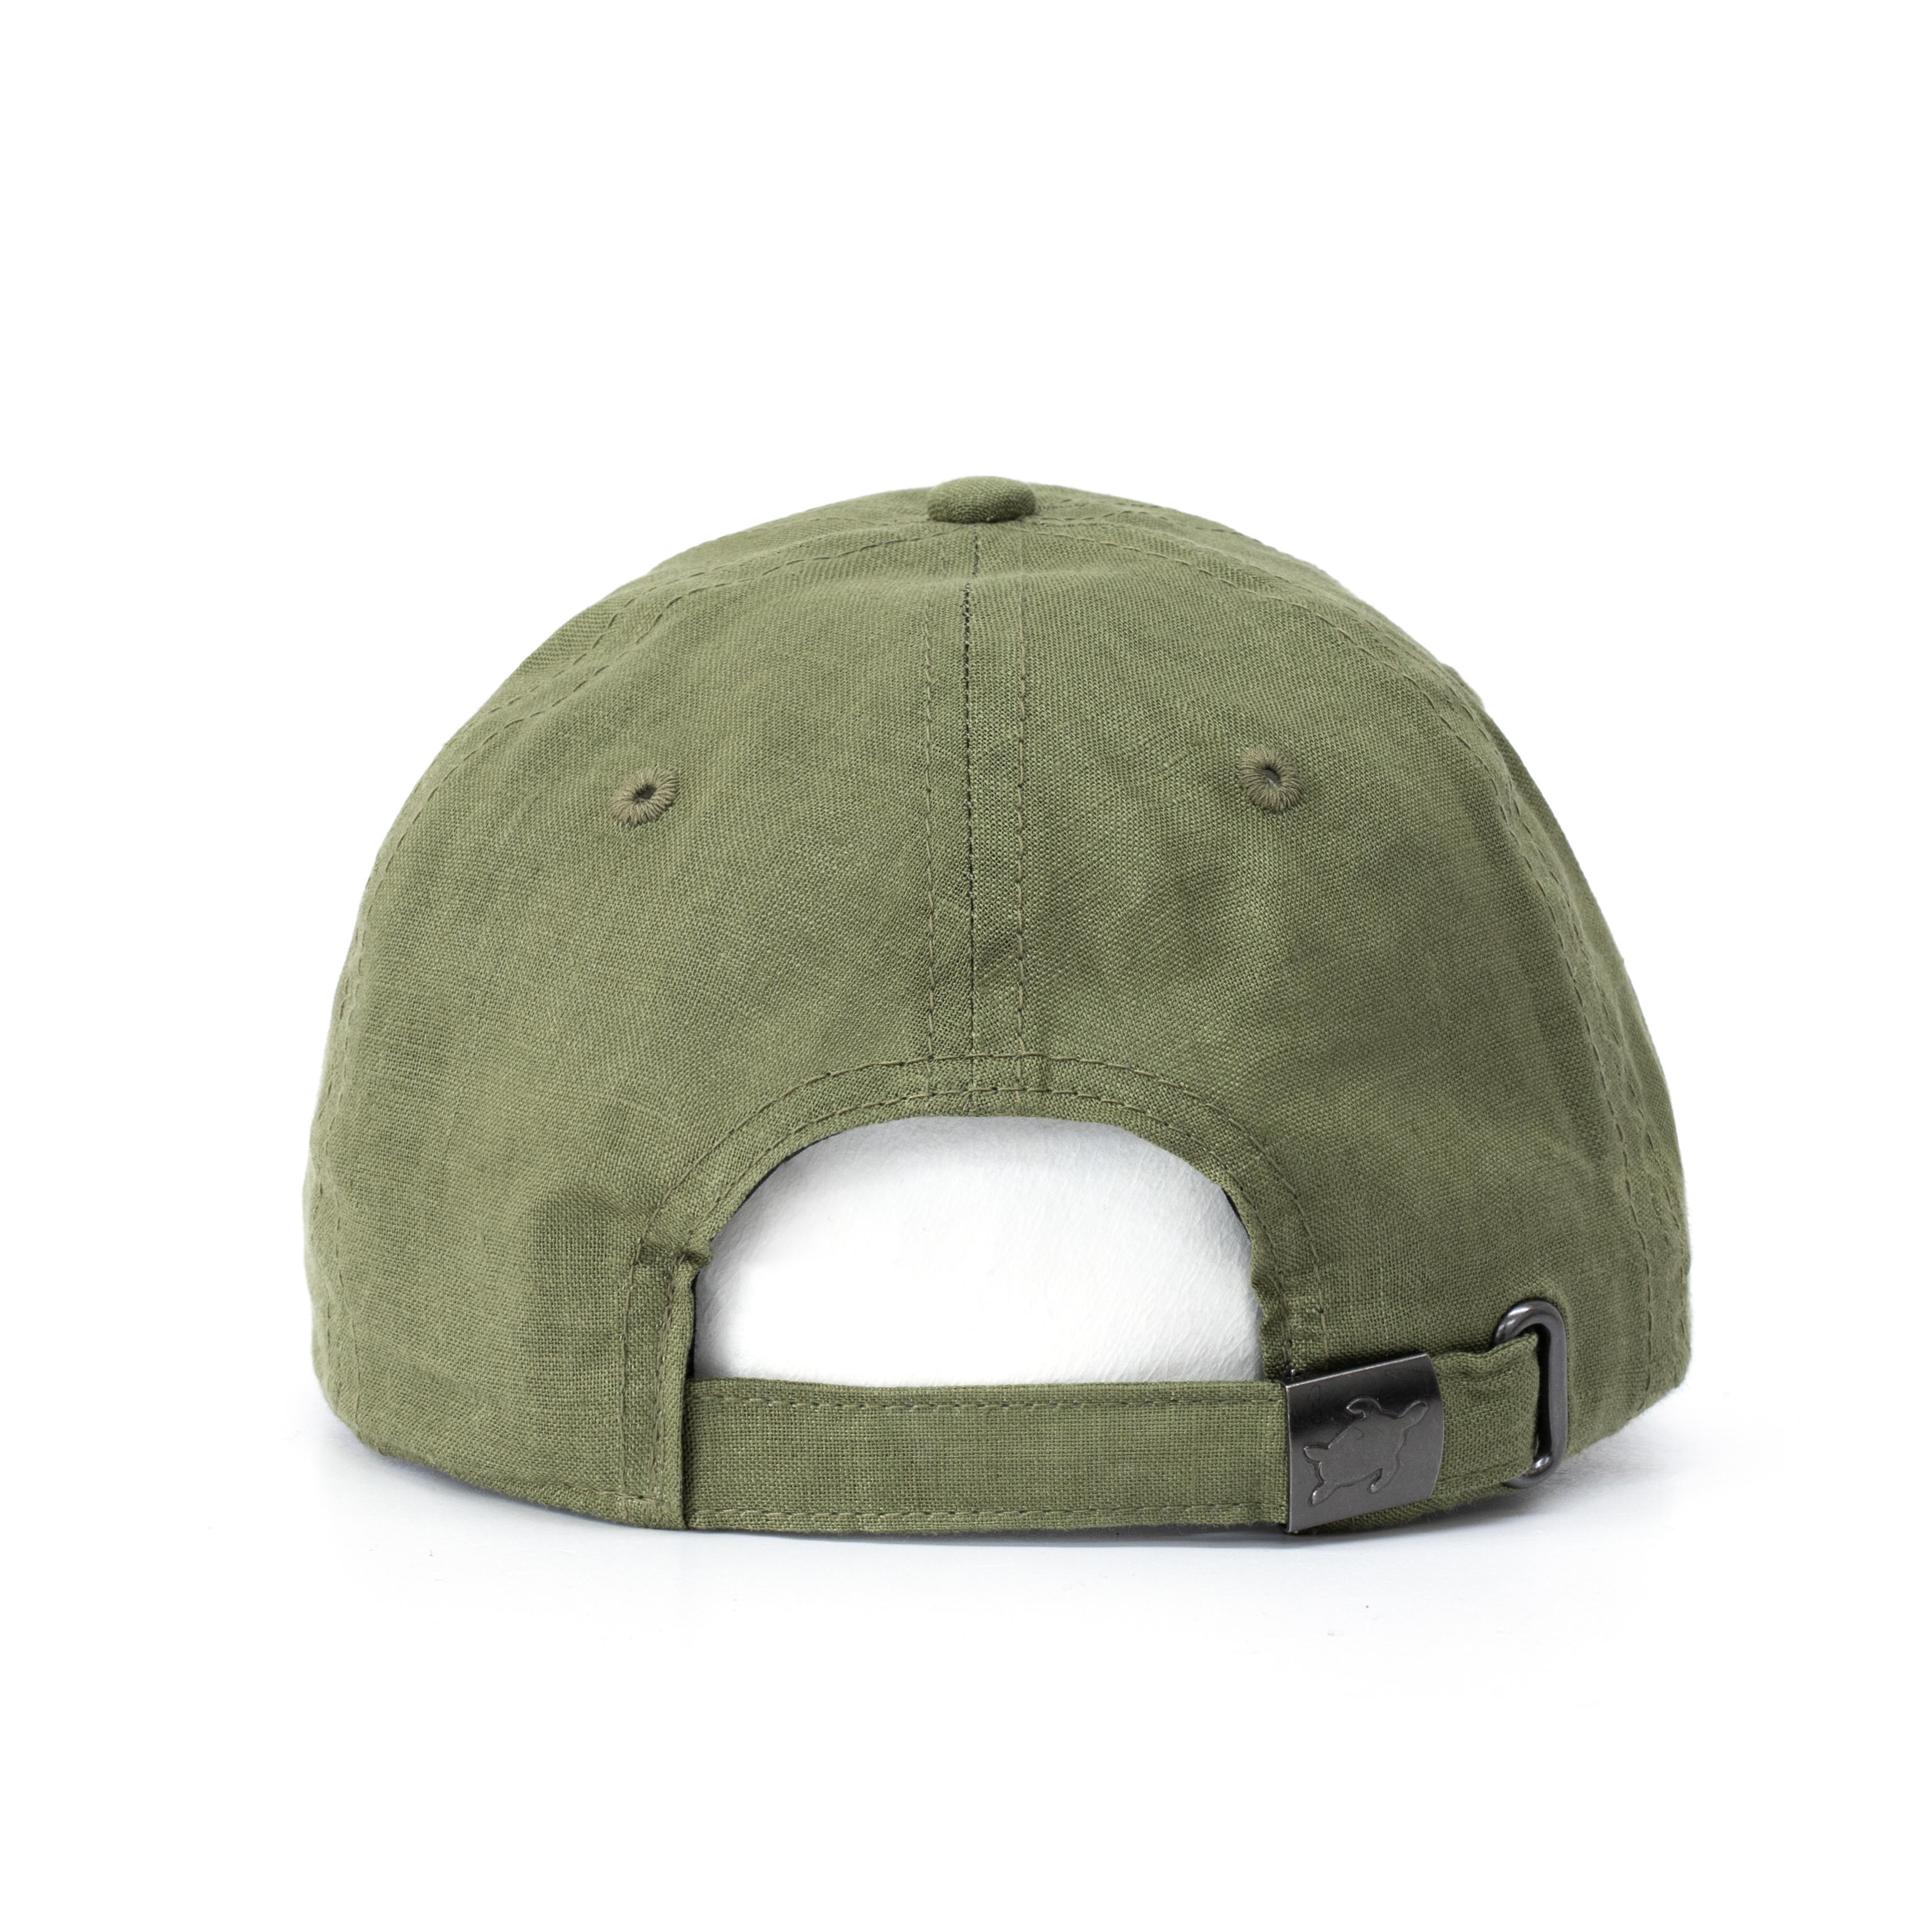 Smith & Miller Clemente Unisex Unstructured Cap, olive